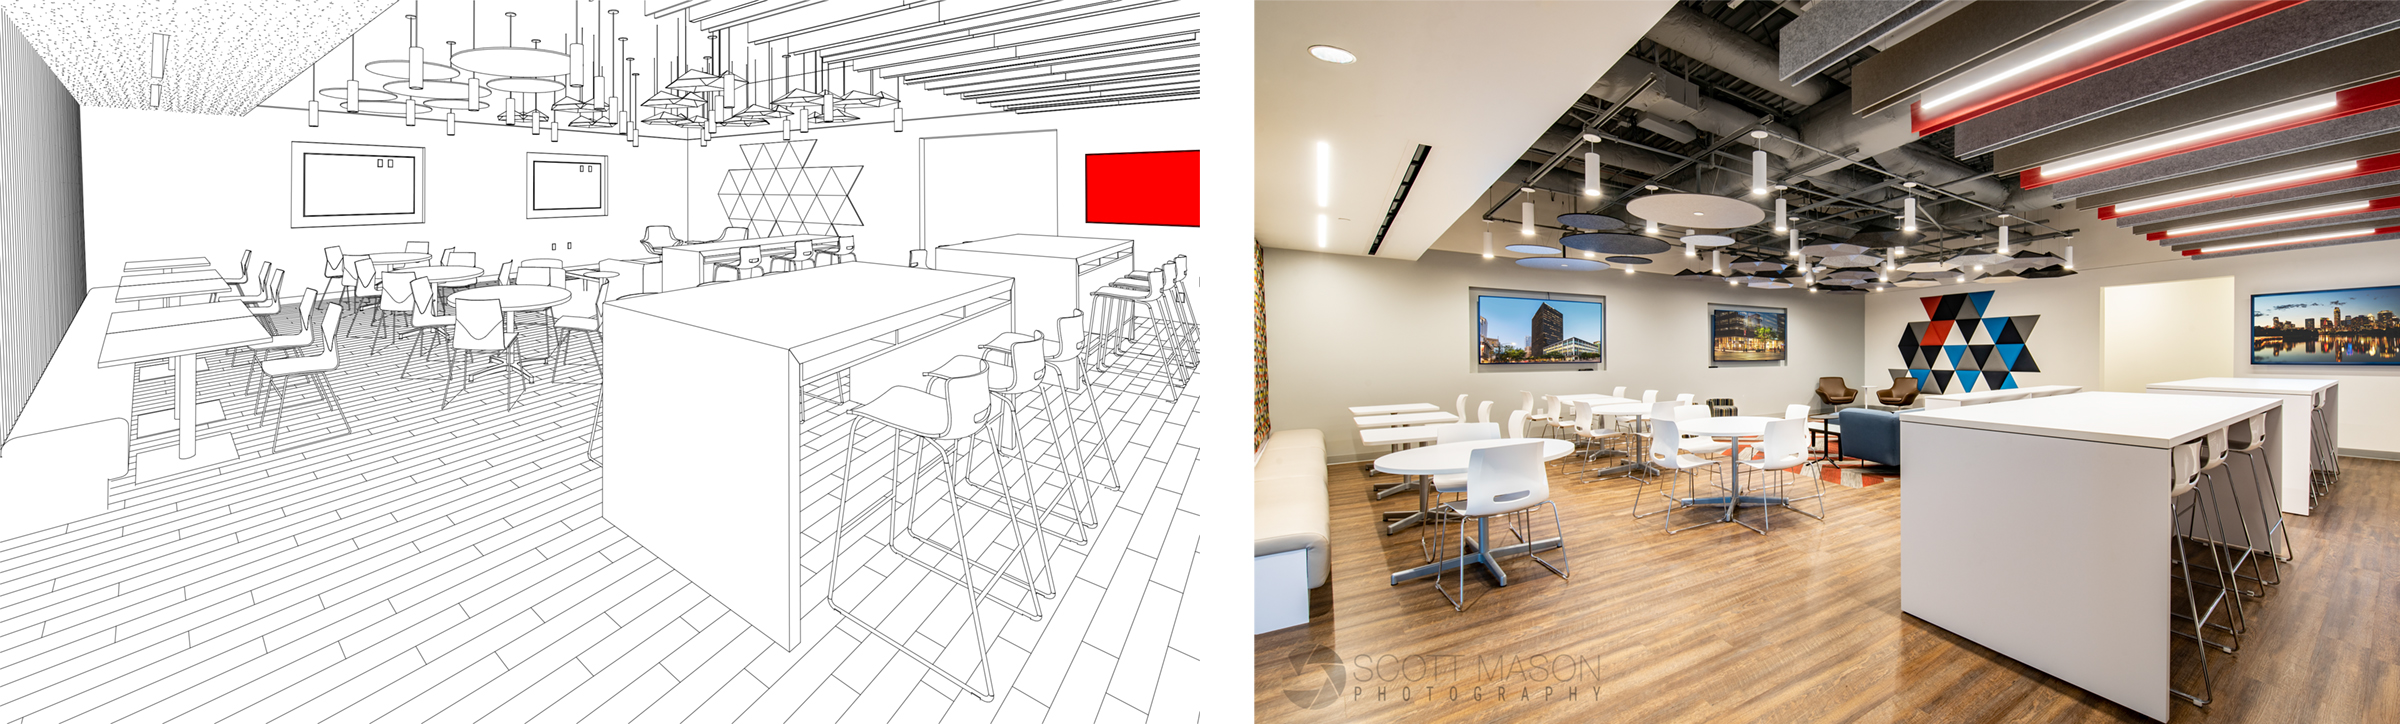 side-by-side of an architectural rendering and interior photo of an office